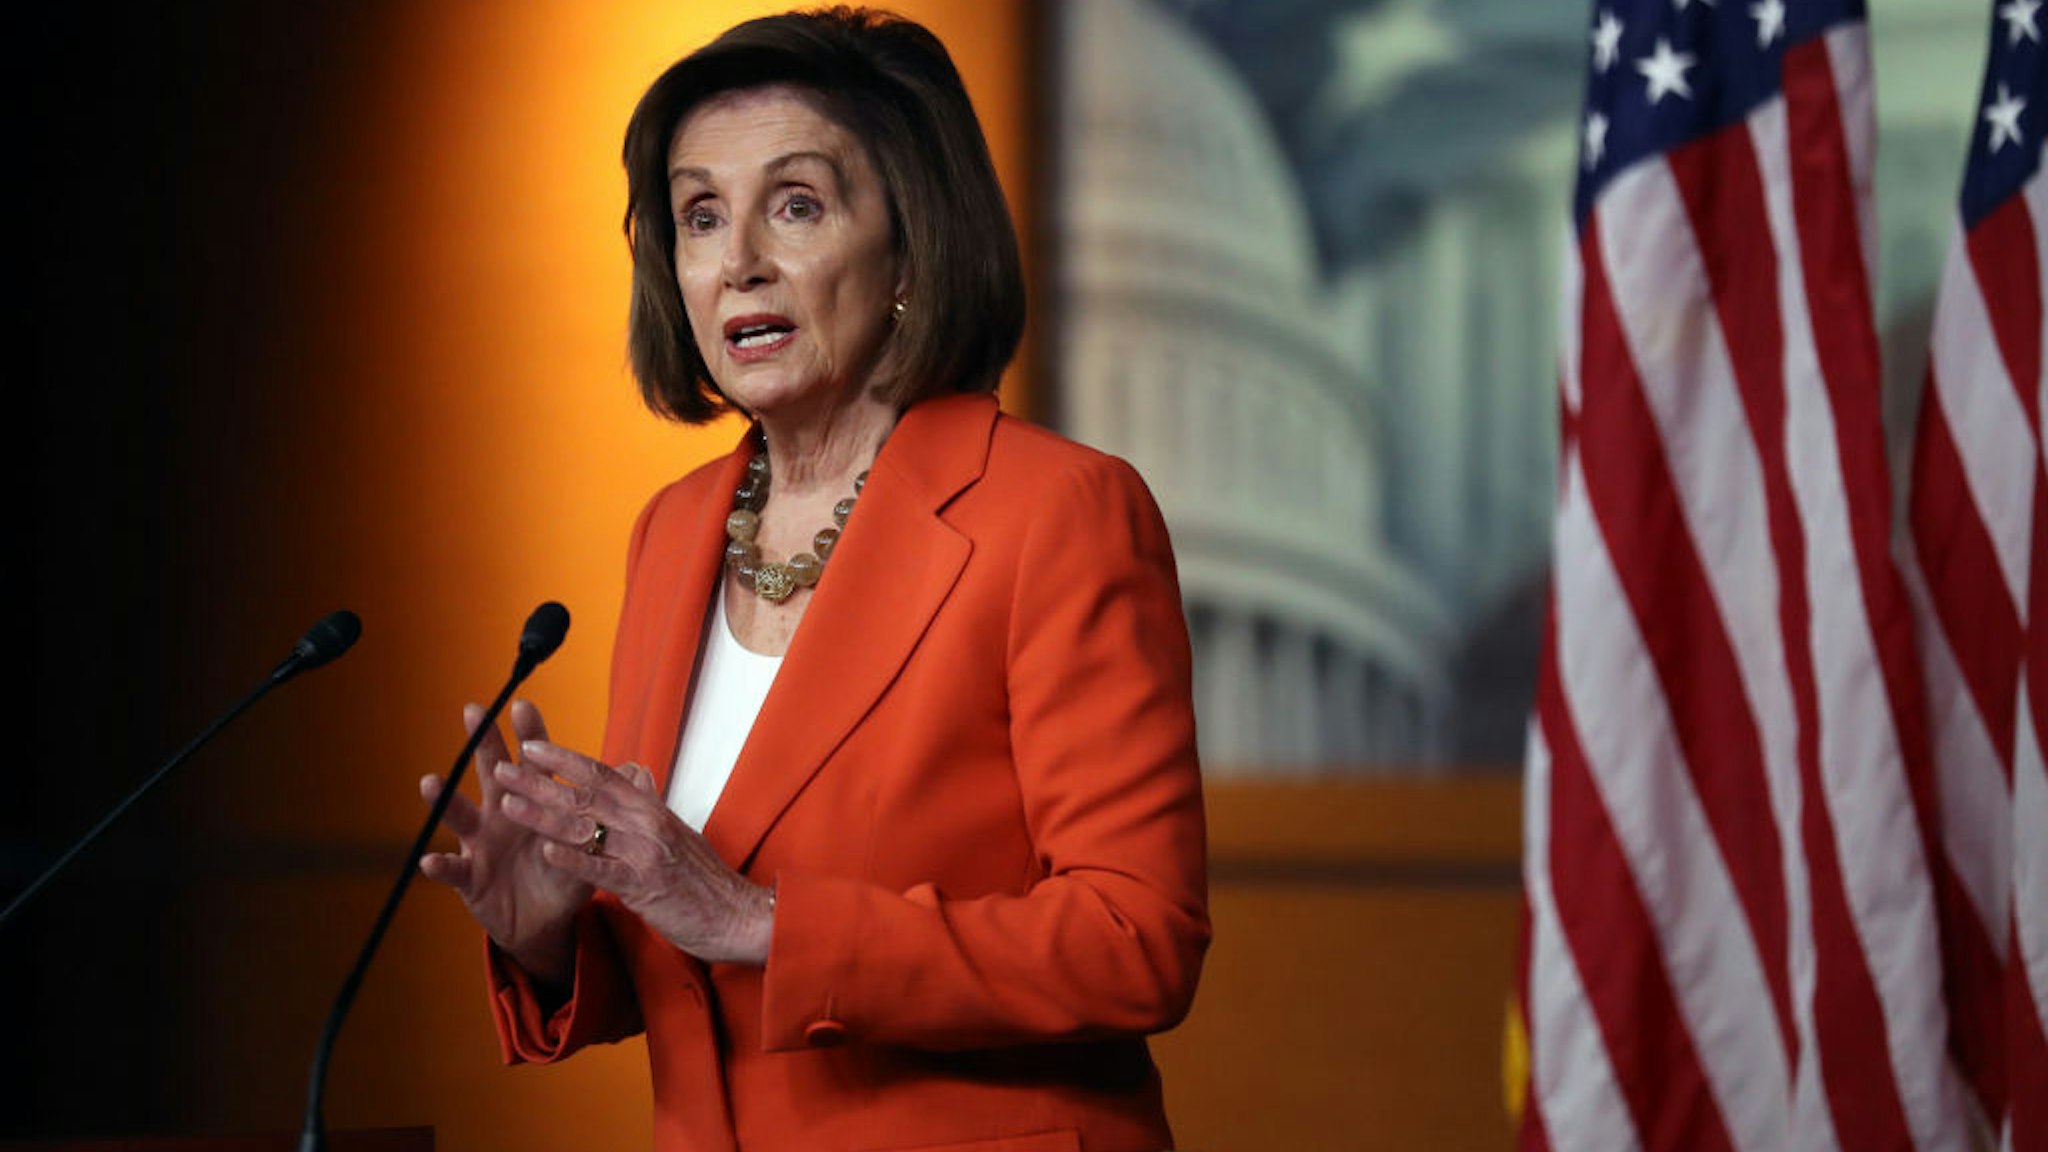 WASHINGTON, DC - OCTOBER 31: U.S. Speaker of the House Nancy Pelosi delivers remarks at a press conference at the U.S. Capitol on October 31, 2019 in Washington, DC. Later today The U.S. House of Representatives is scheduled to vote on a resolution formalizing the impeachment inquiry centered on U.S. President Donald Trump. (Photo by Chip Somodevilla/Getty Images)